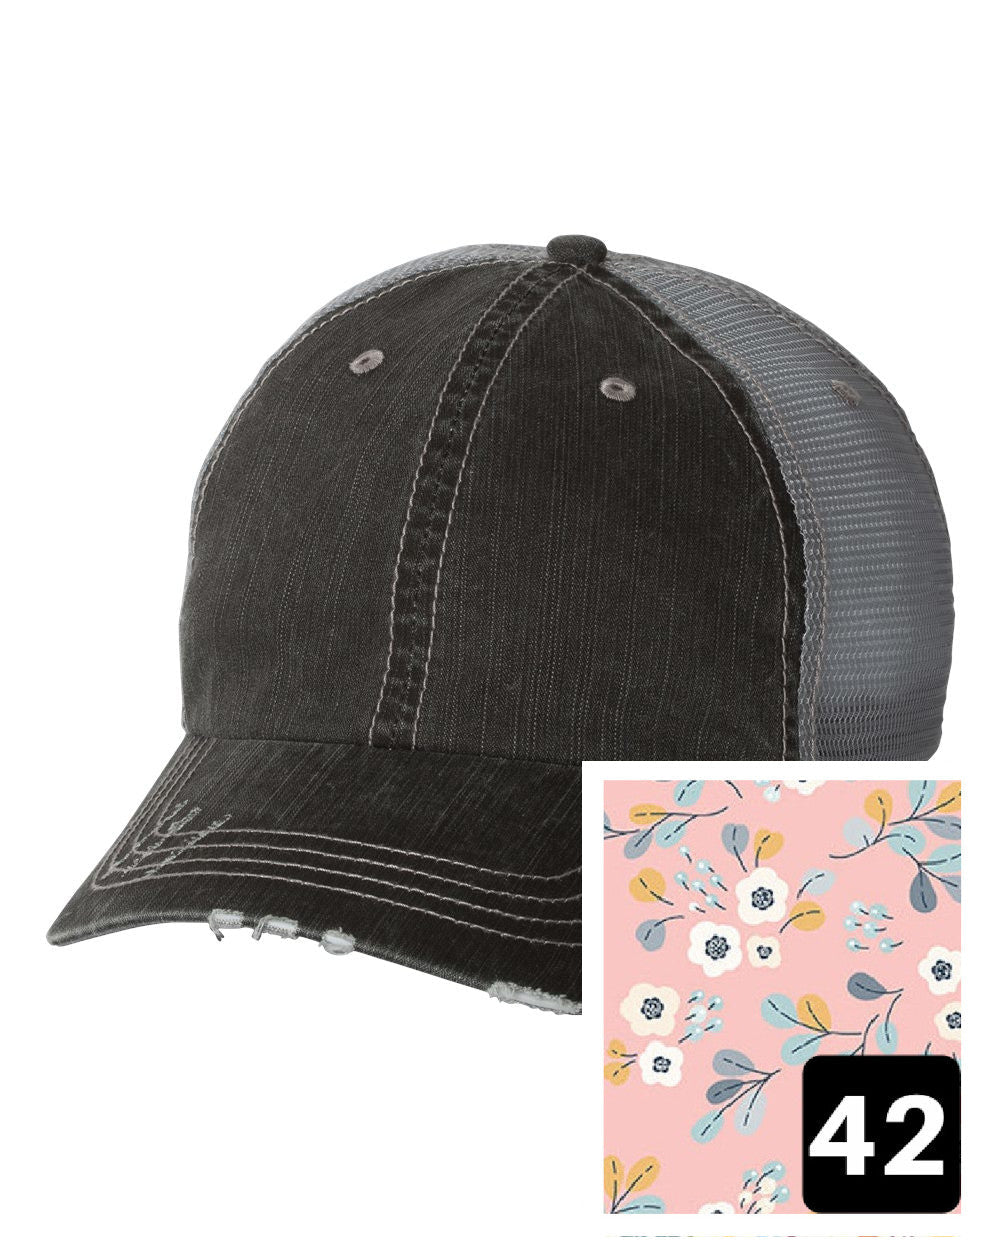 gray distressed trucker hat with light blue and pink mosaic fabric state of Minnesota